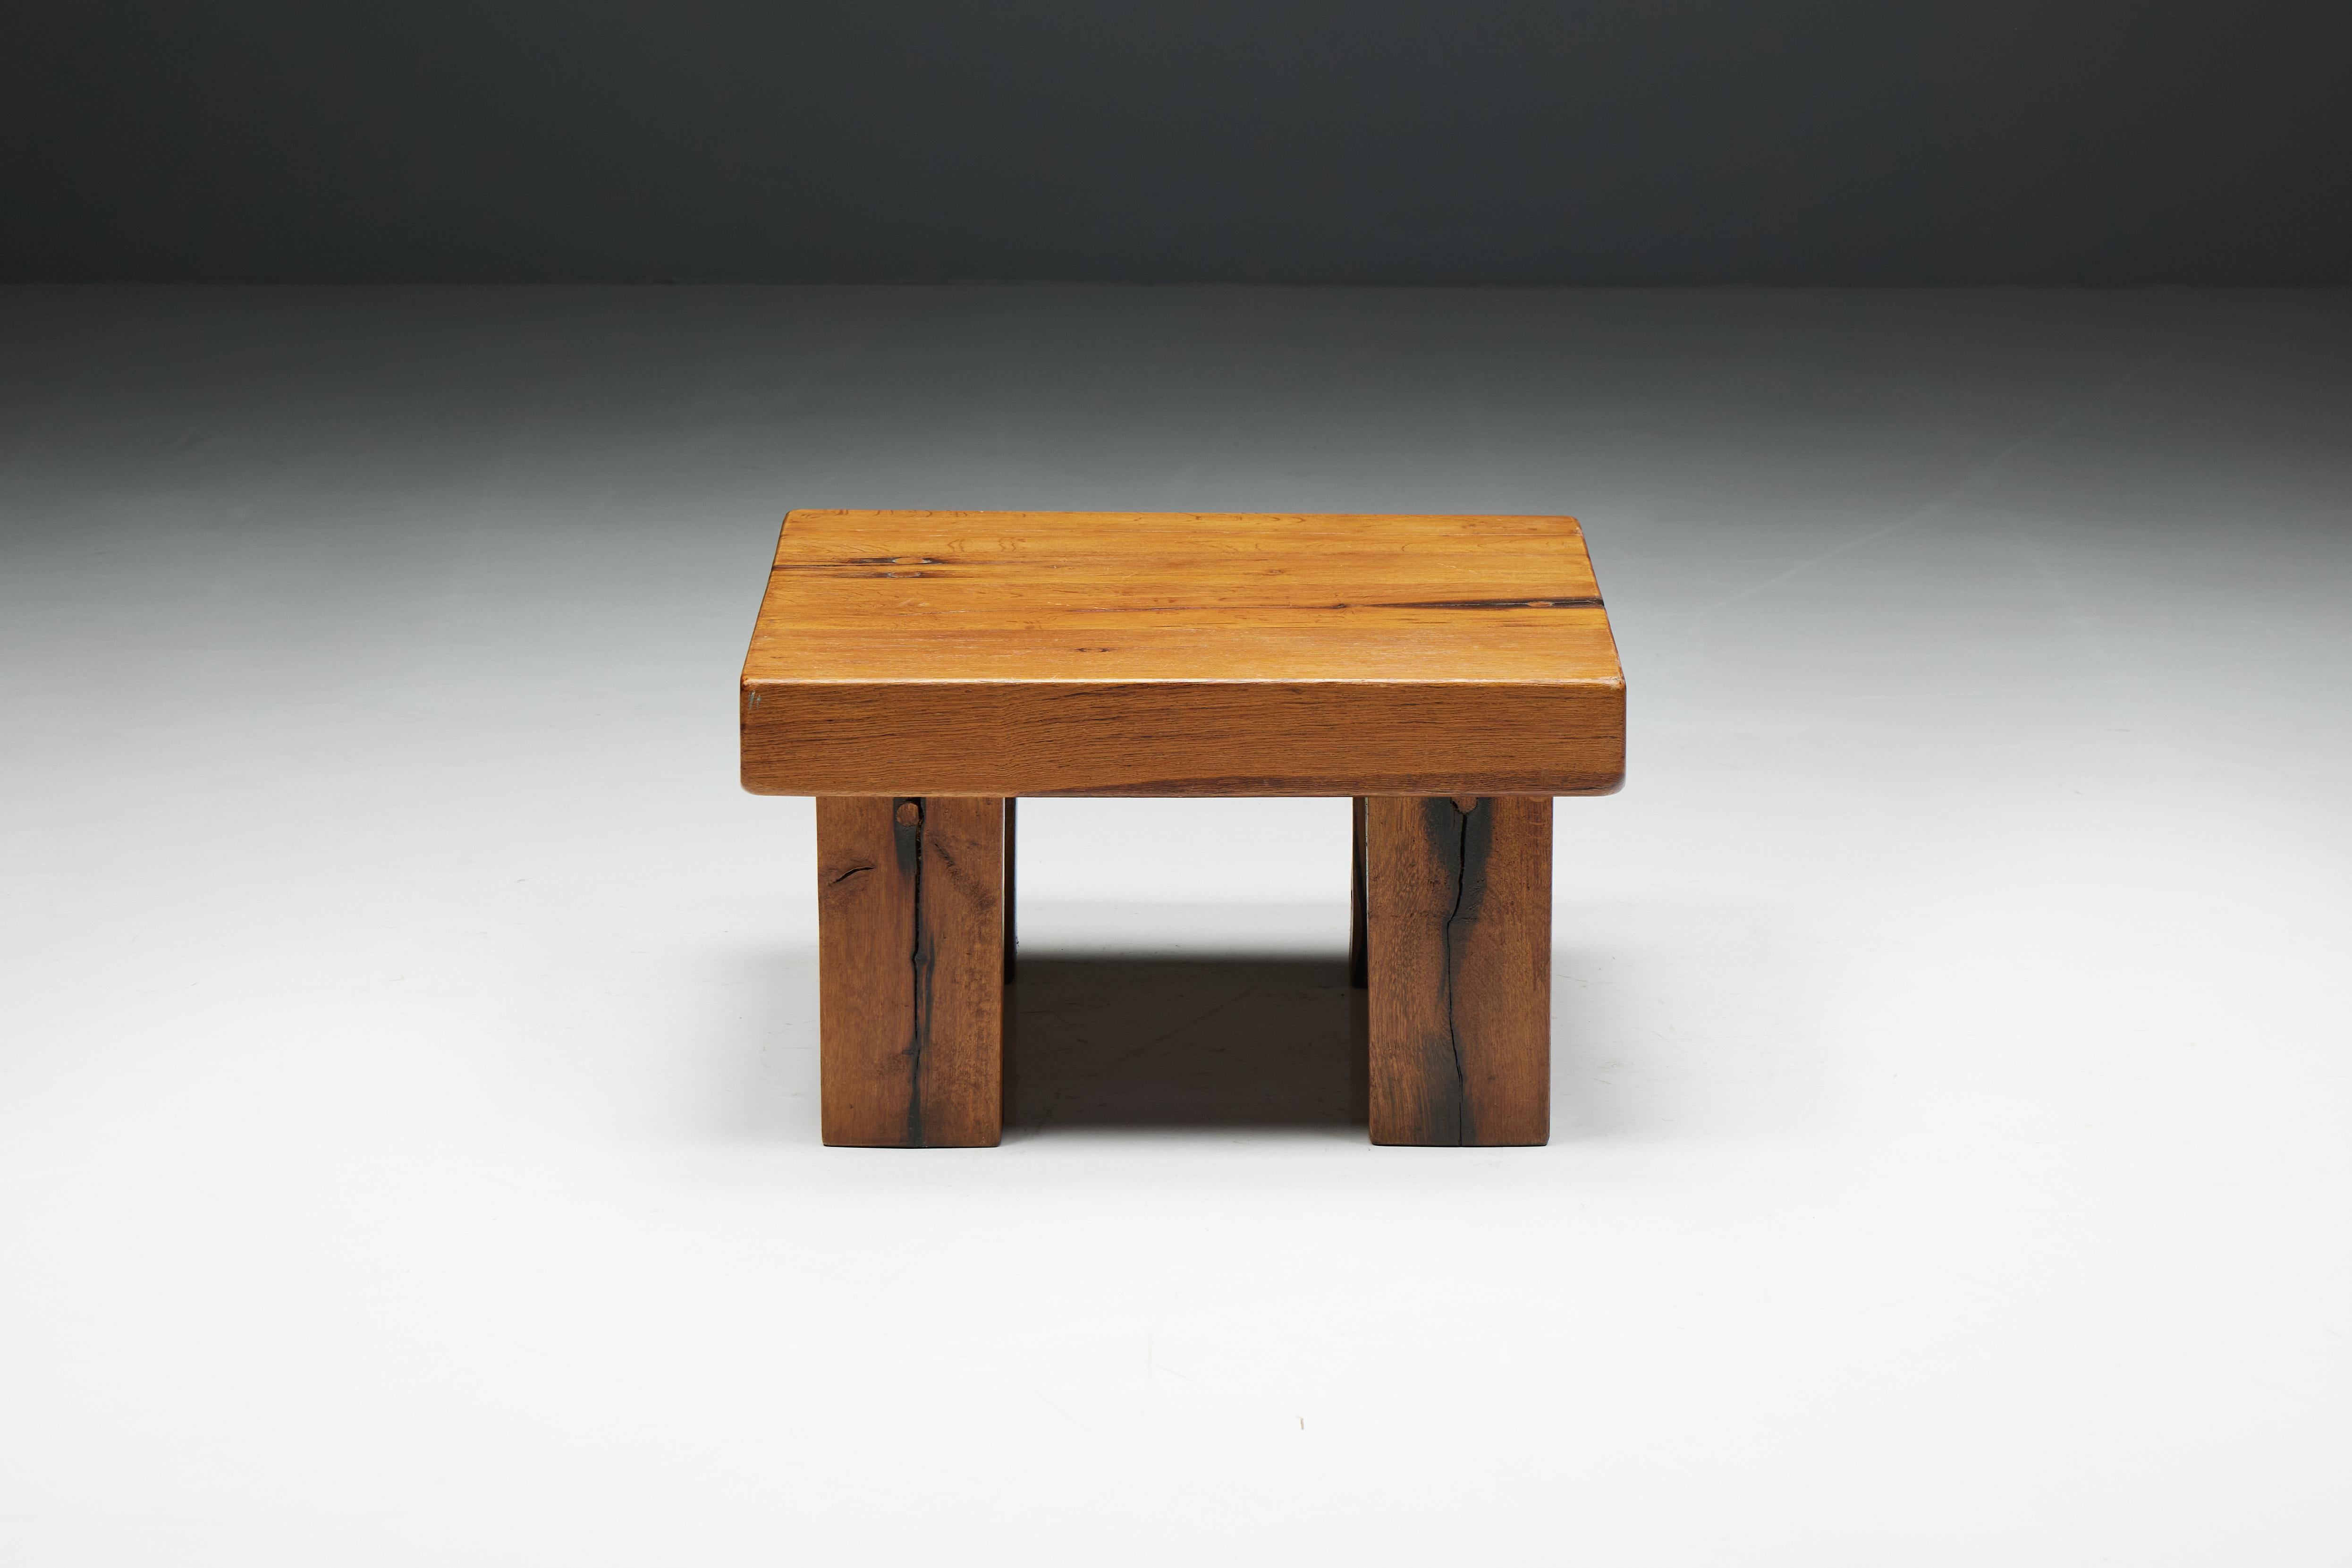 Rustic square brutalist coffee table with a four-legged base, crafted from solid wood with an inviting patina. The square surface offers space for objects like books, magazines, and other curiosities. It can also function as a side table. This